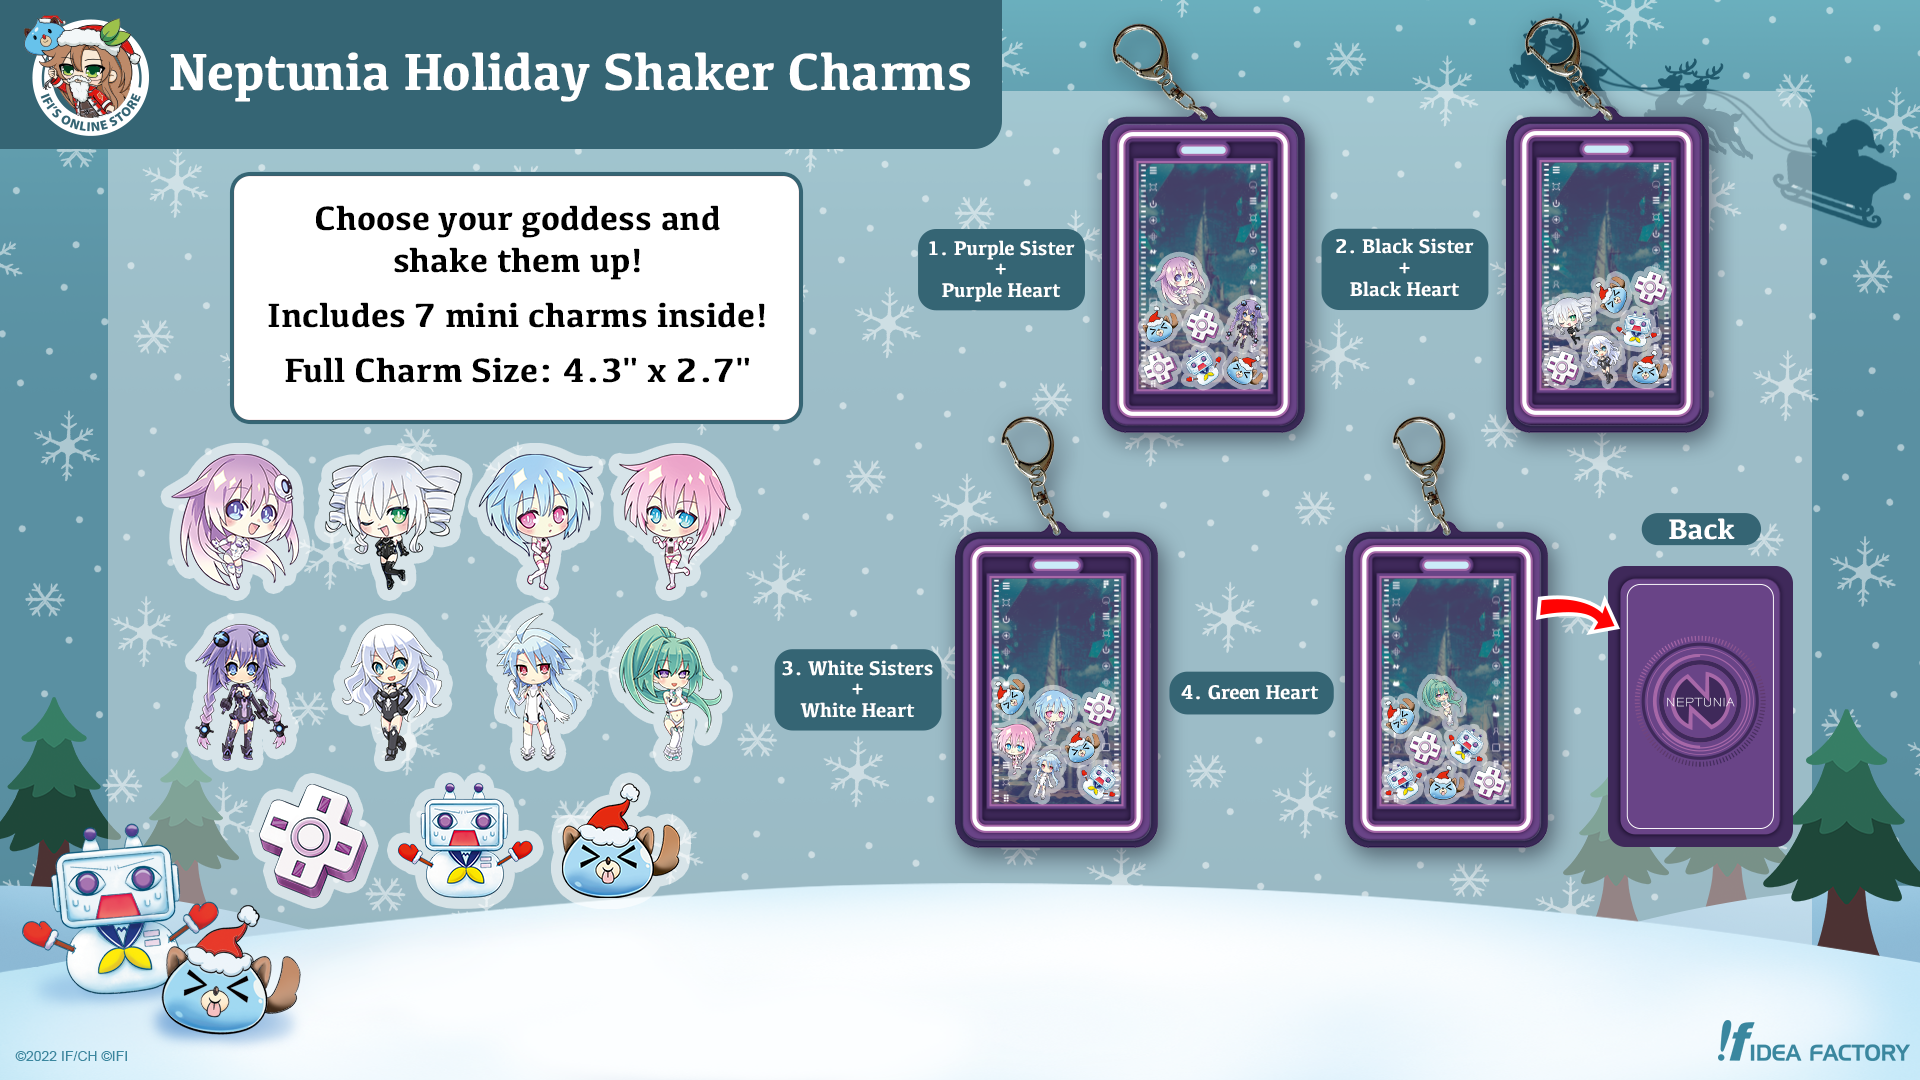 Neptunia Holiday Shaker Charms - White Sisters